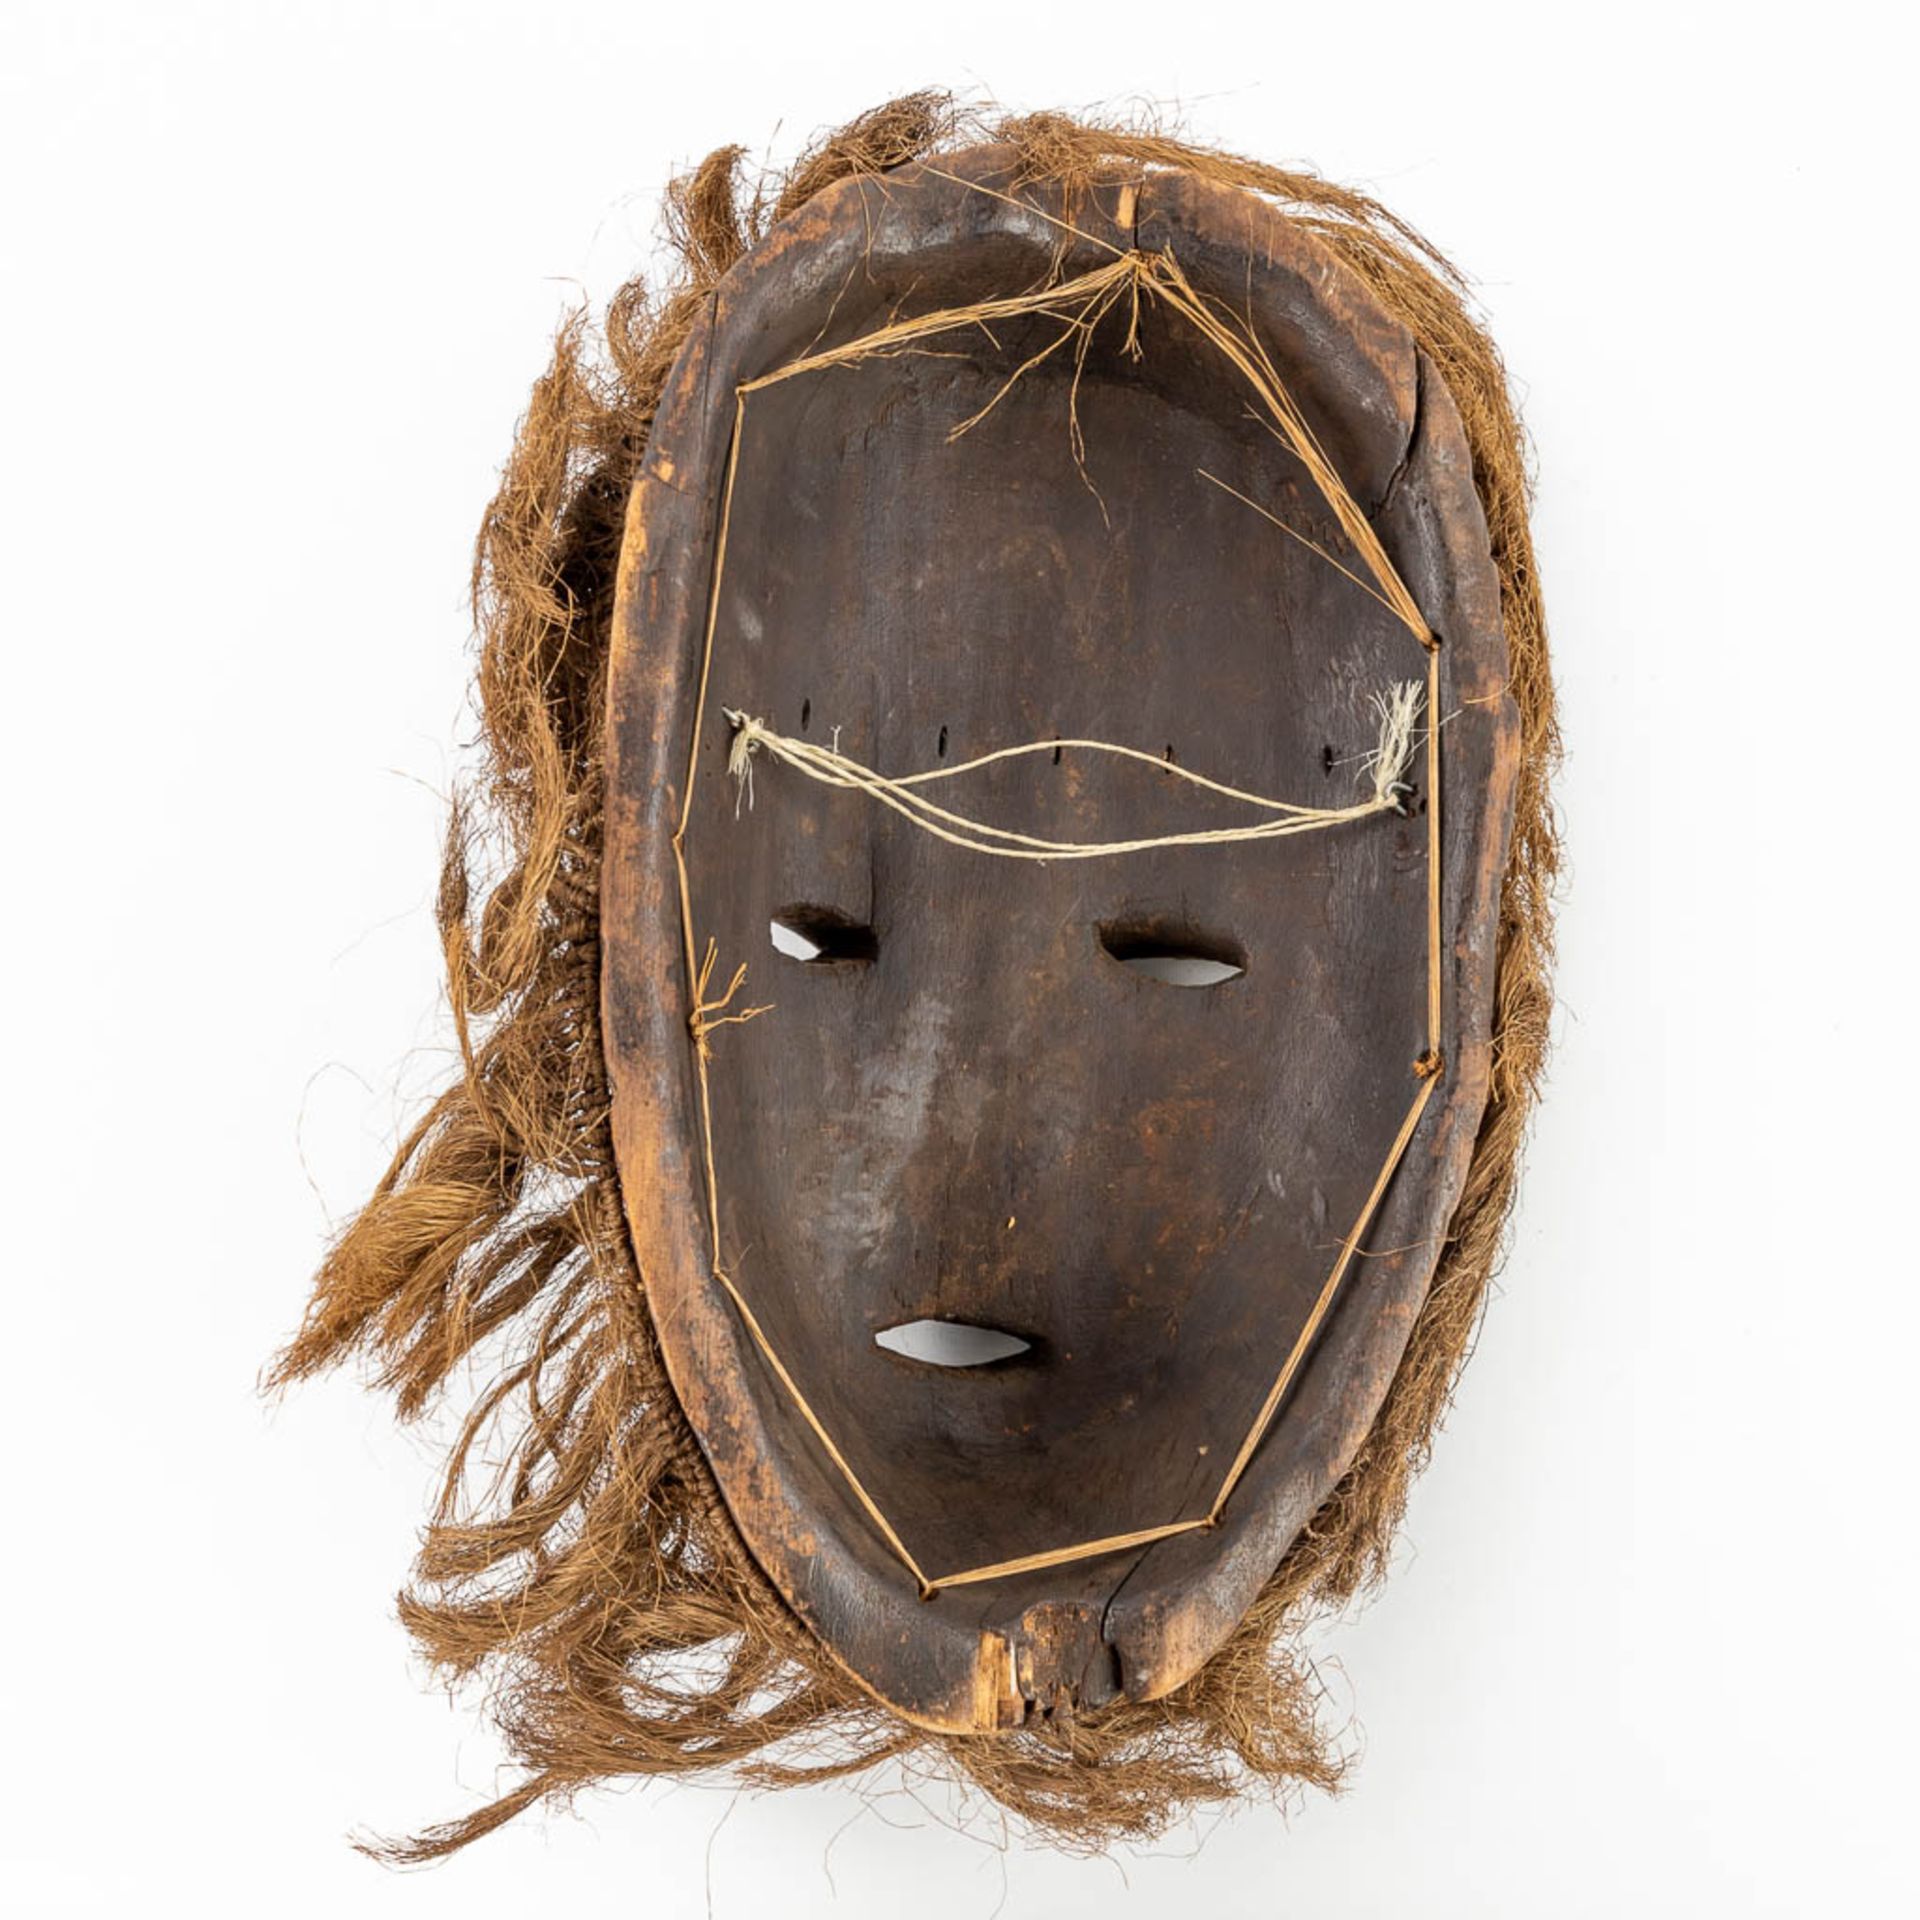 A collection of 2 African masks 'Chokwe' and 'Luba Songye'. (L: 13 x W: 24 x H: 43 cm) - Image 11 of 21